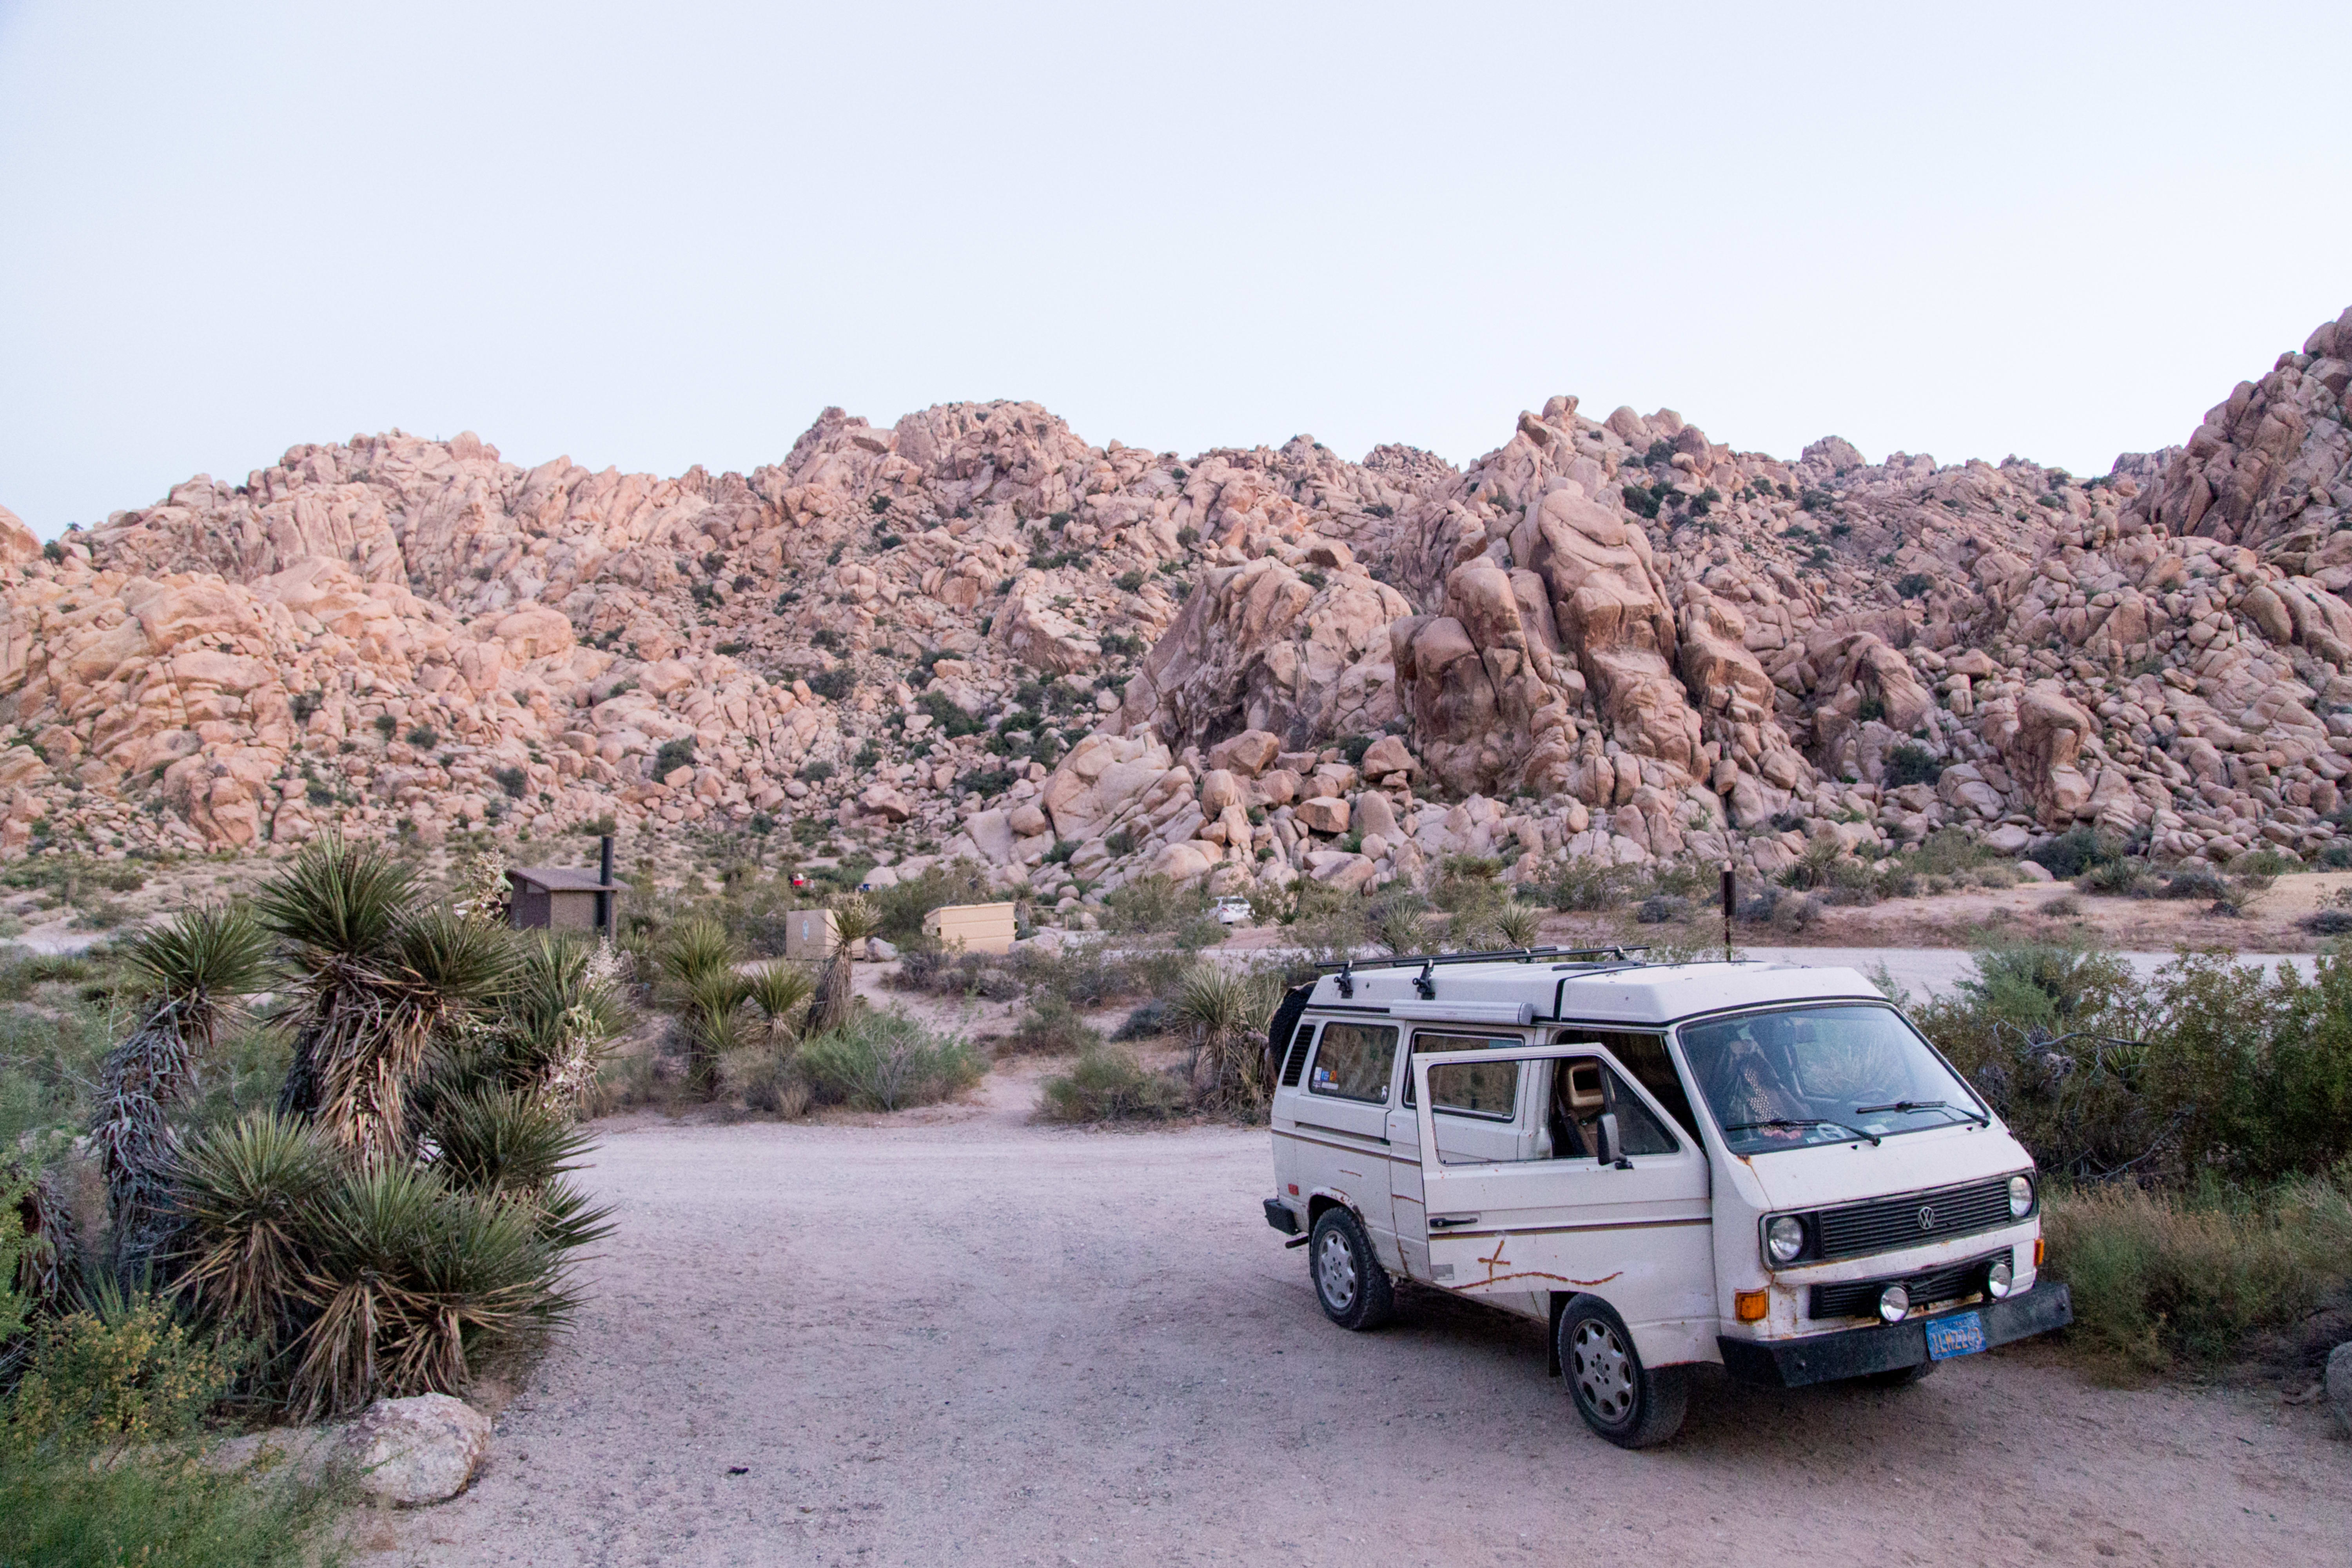 Which Entrance Is Best for Joshua Tree?